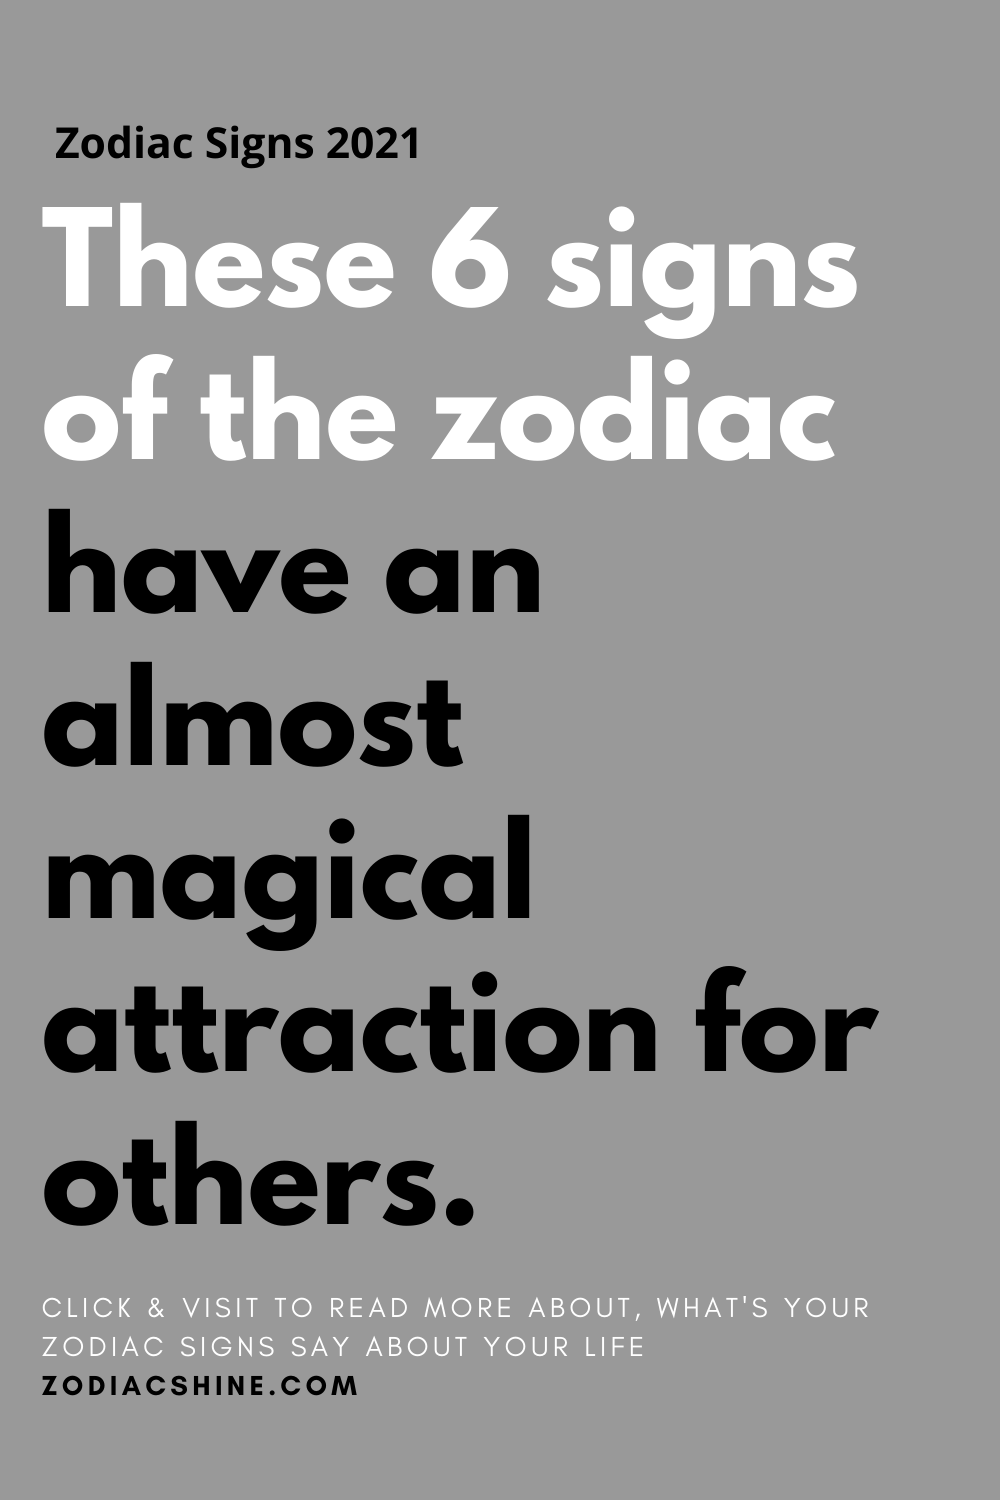 These 6 signs of the zodiac have an almost magical attraction for others.